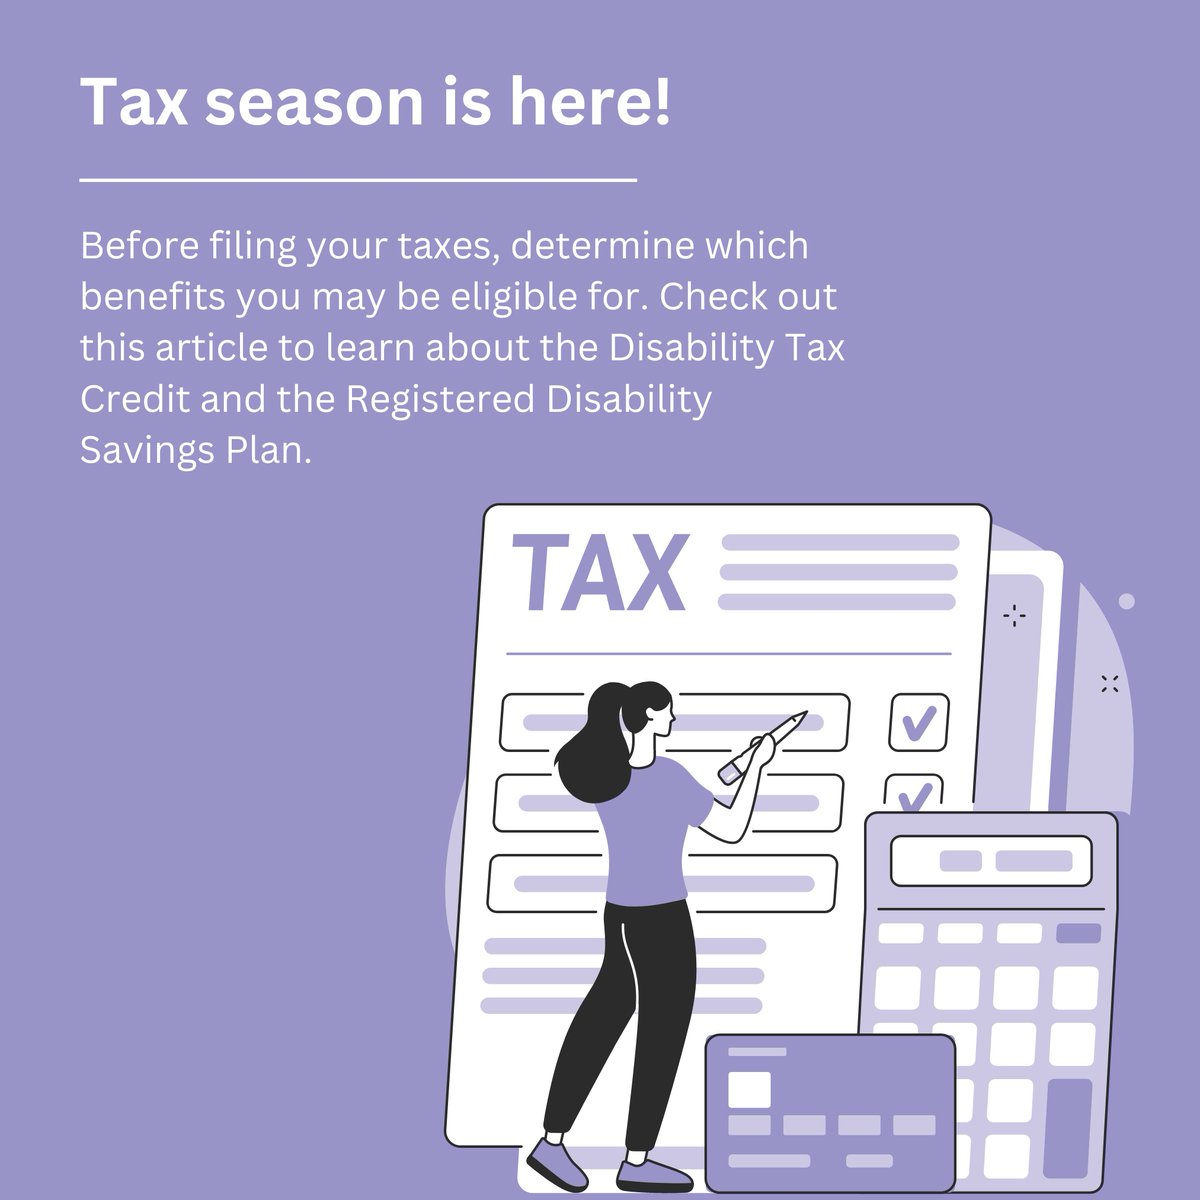 #TaxSeason is here! Before filing your taxes, determine which benefits you may be eligible for. Check out our blog to learn about the Disability Tax Credit and the Registered Disability Savings Plan. Read our blog at: ow.ly/4mEi50R1MB4 #PHCommunity #PH